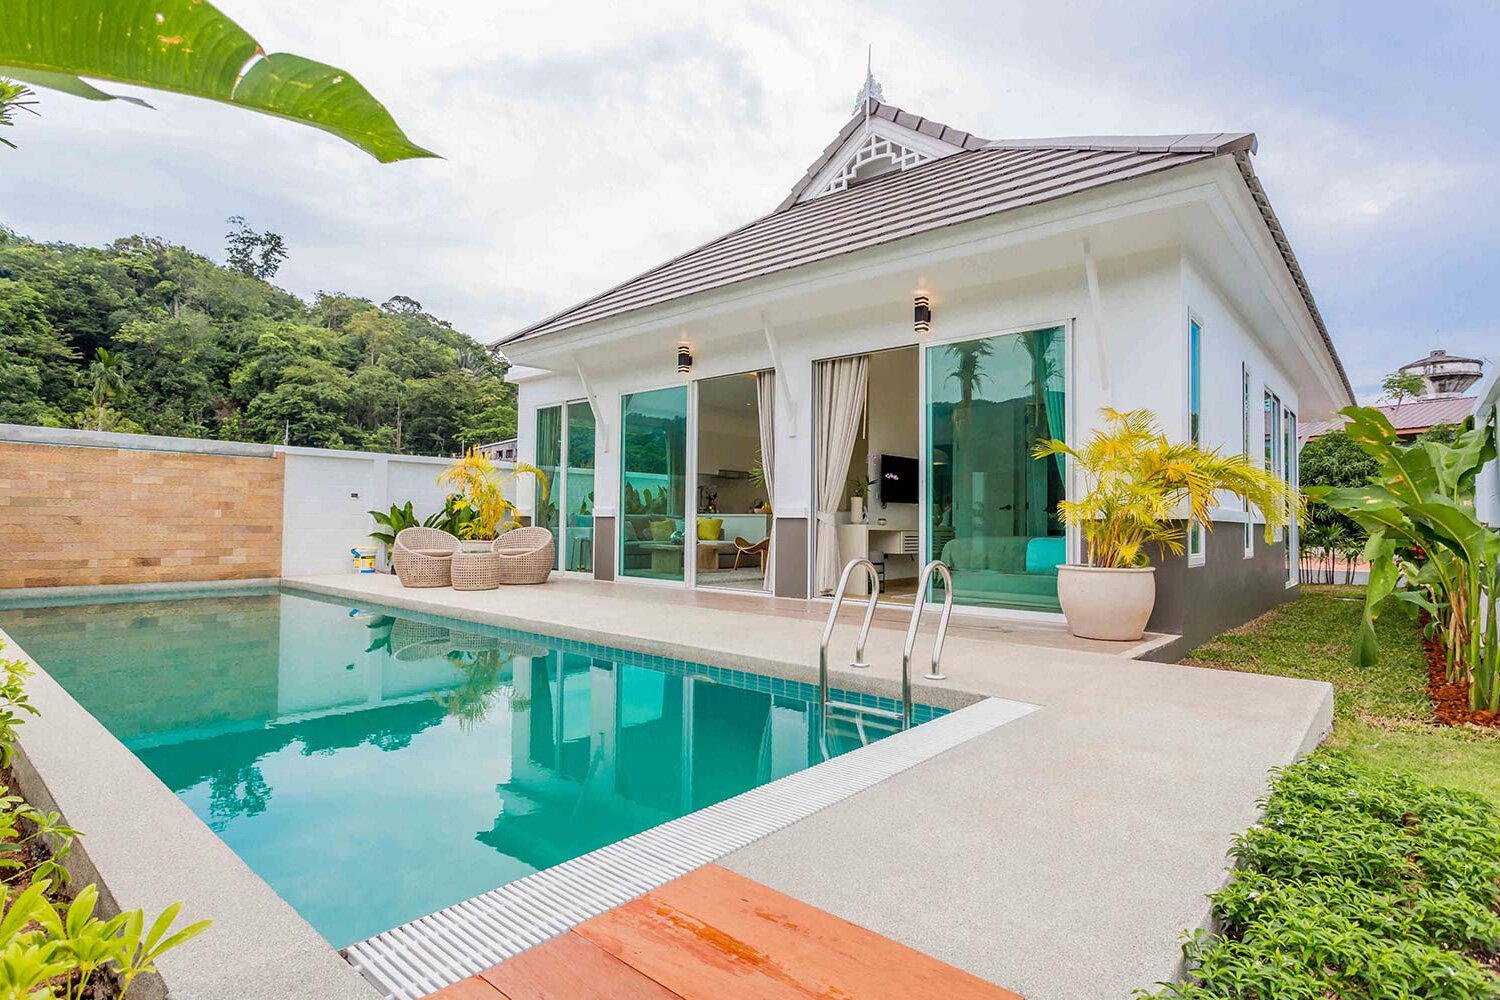 Modern Houses in Thailand: A Look Inside